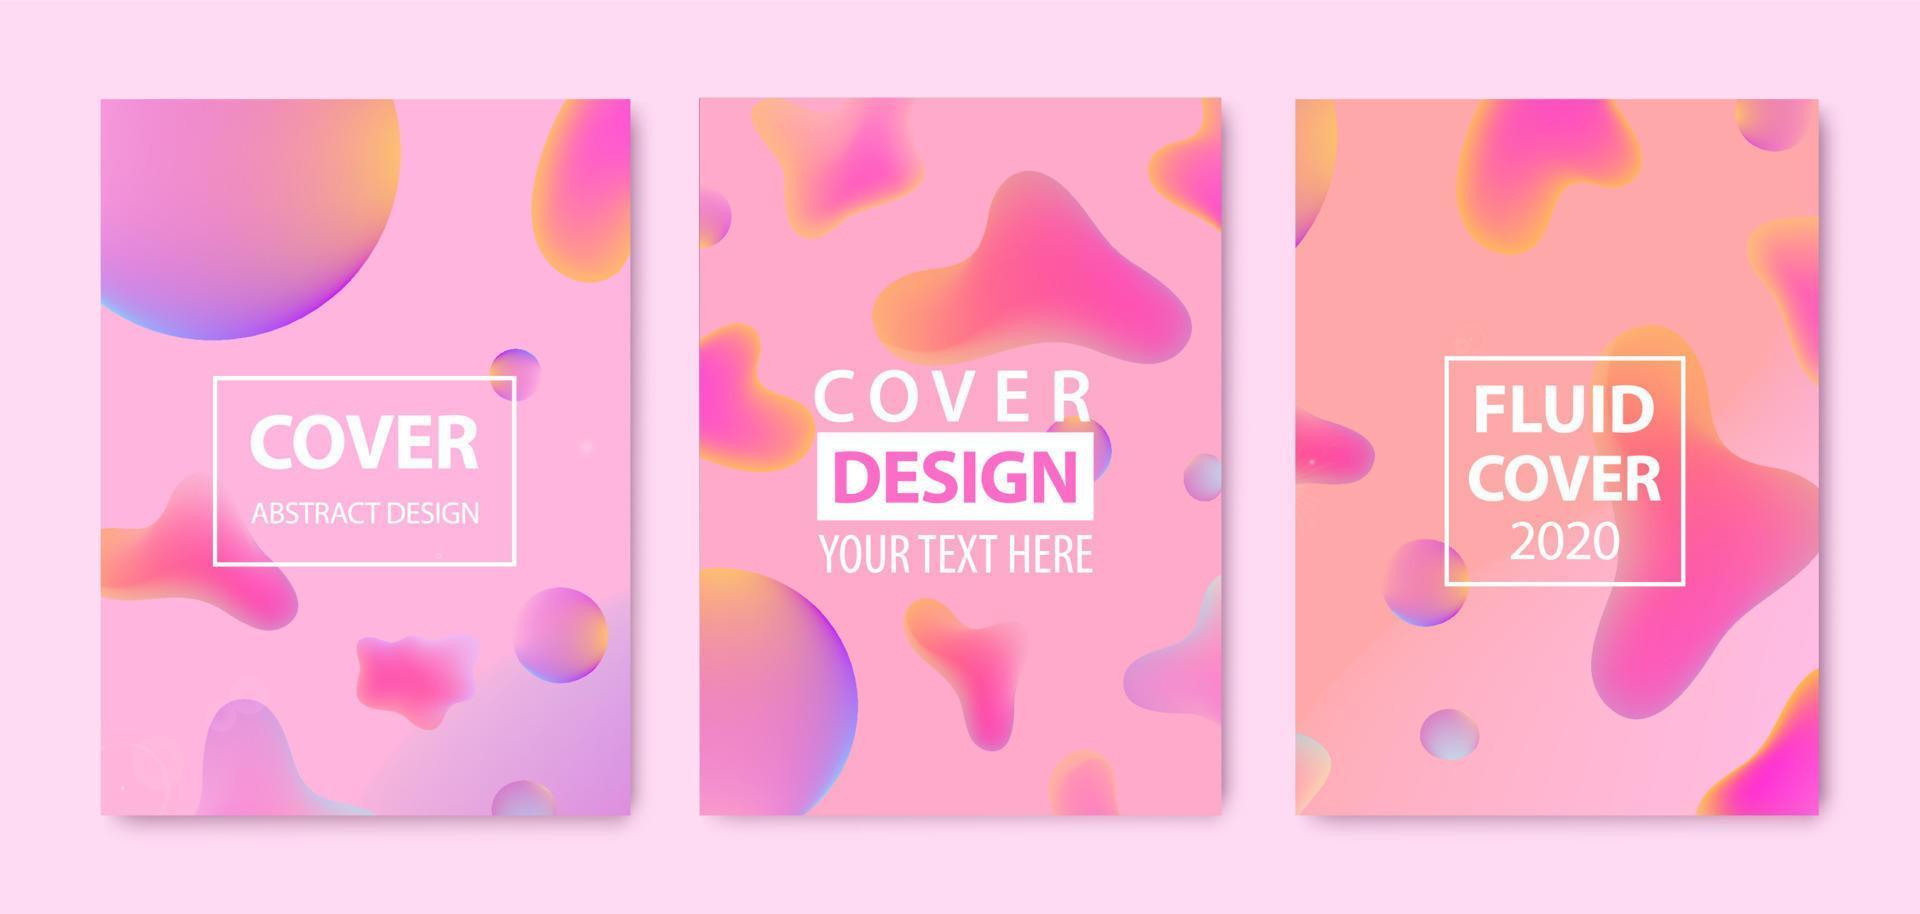 Vector set of abstract fluid creative templates, cards, color covers set. Geometric design, liquids, shapes. Pastel and neon design, geometric fluid graphic shape, background